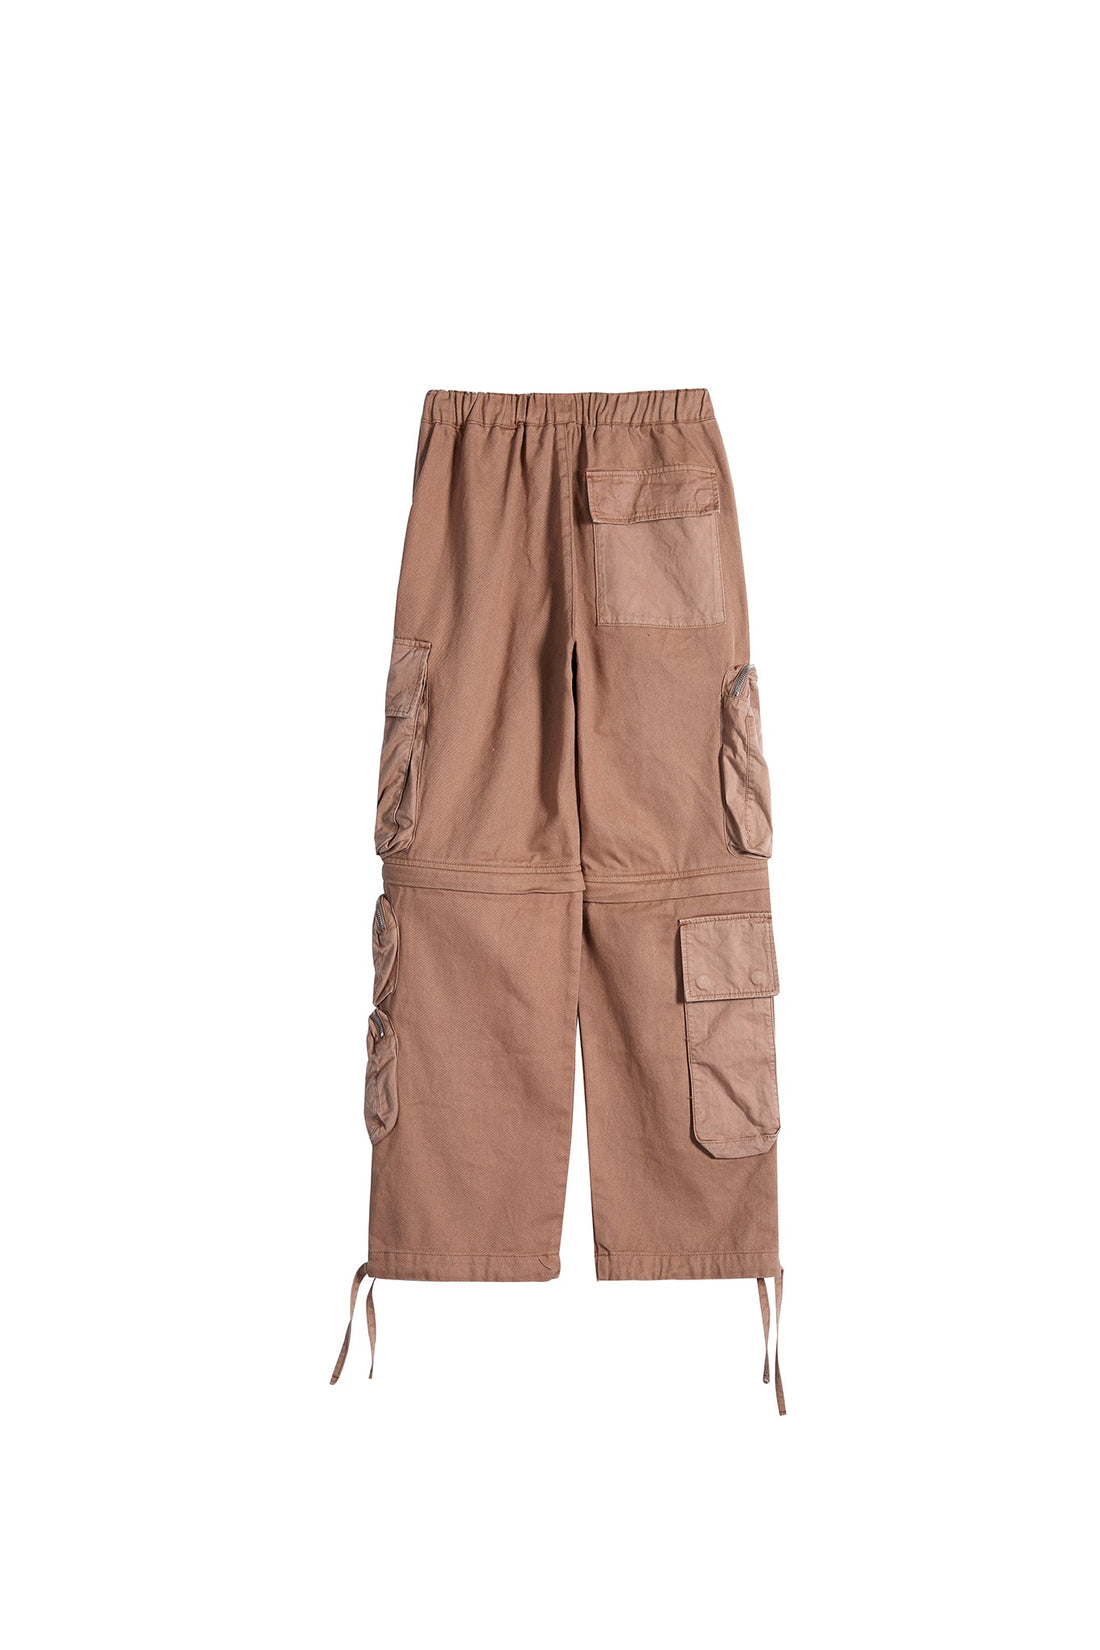 POCKET CARGO PANTS BROWN Acupuncture